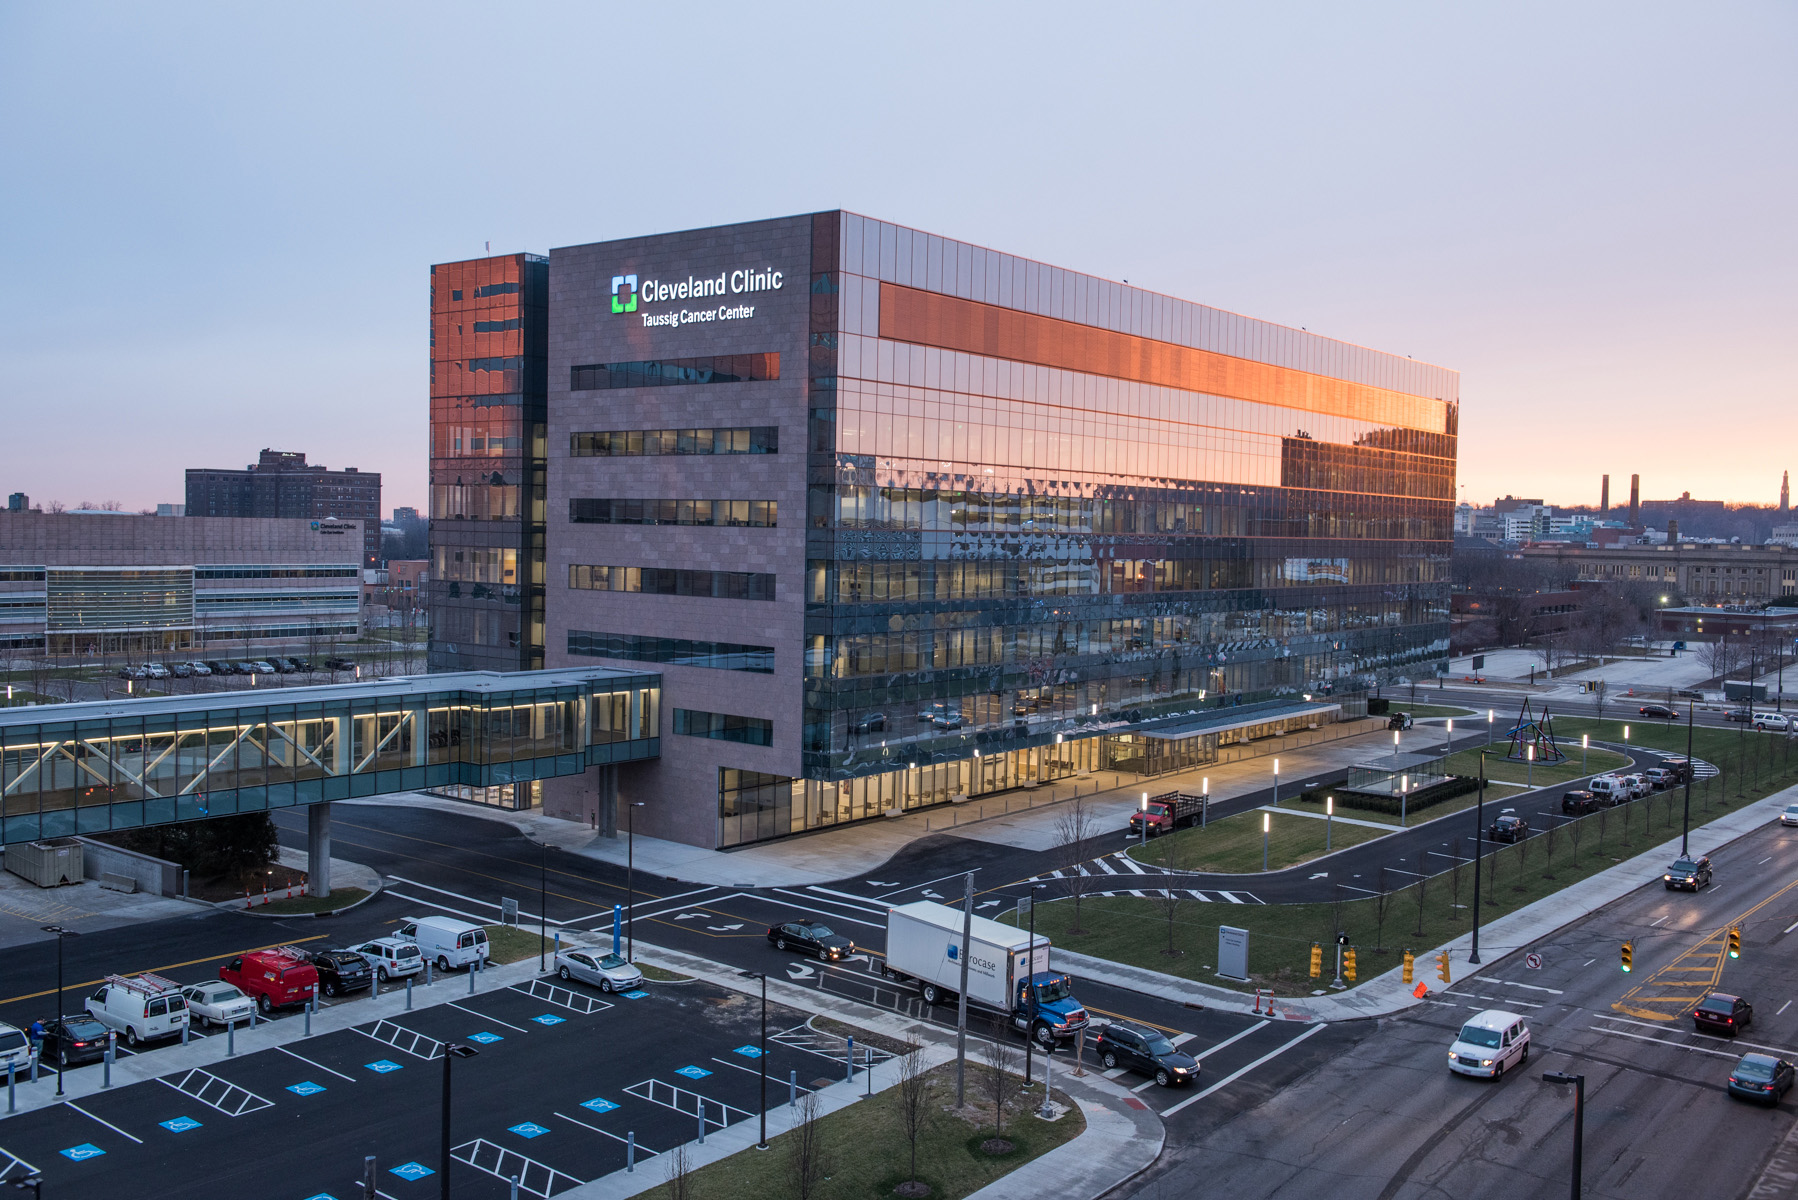 The Cleveland Clinic Foundation